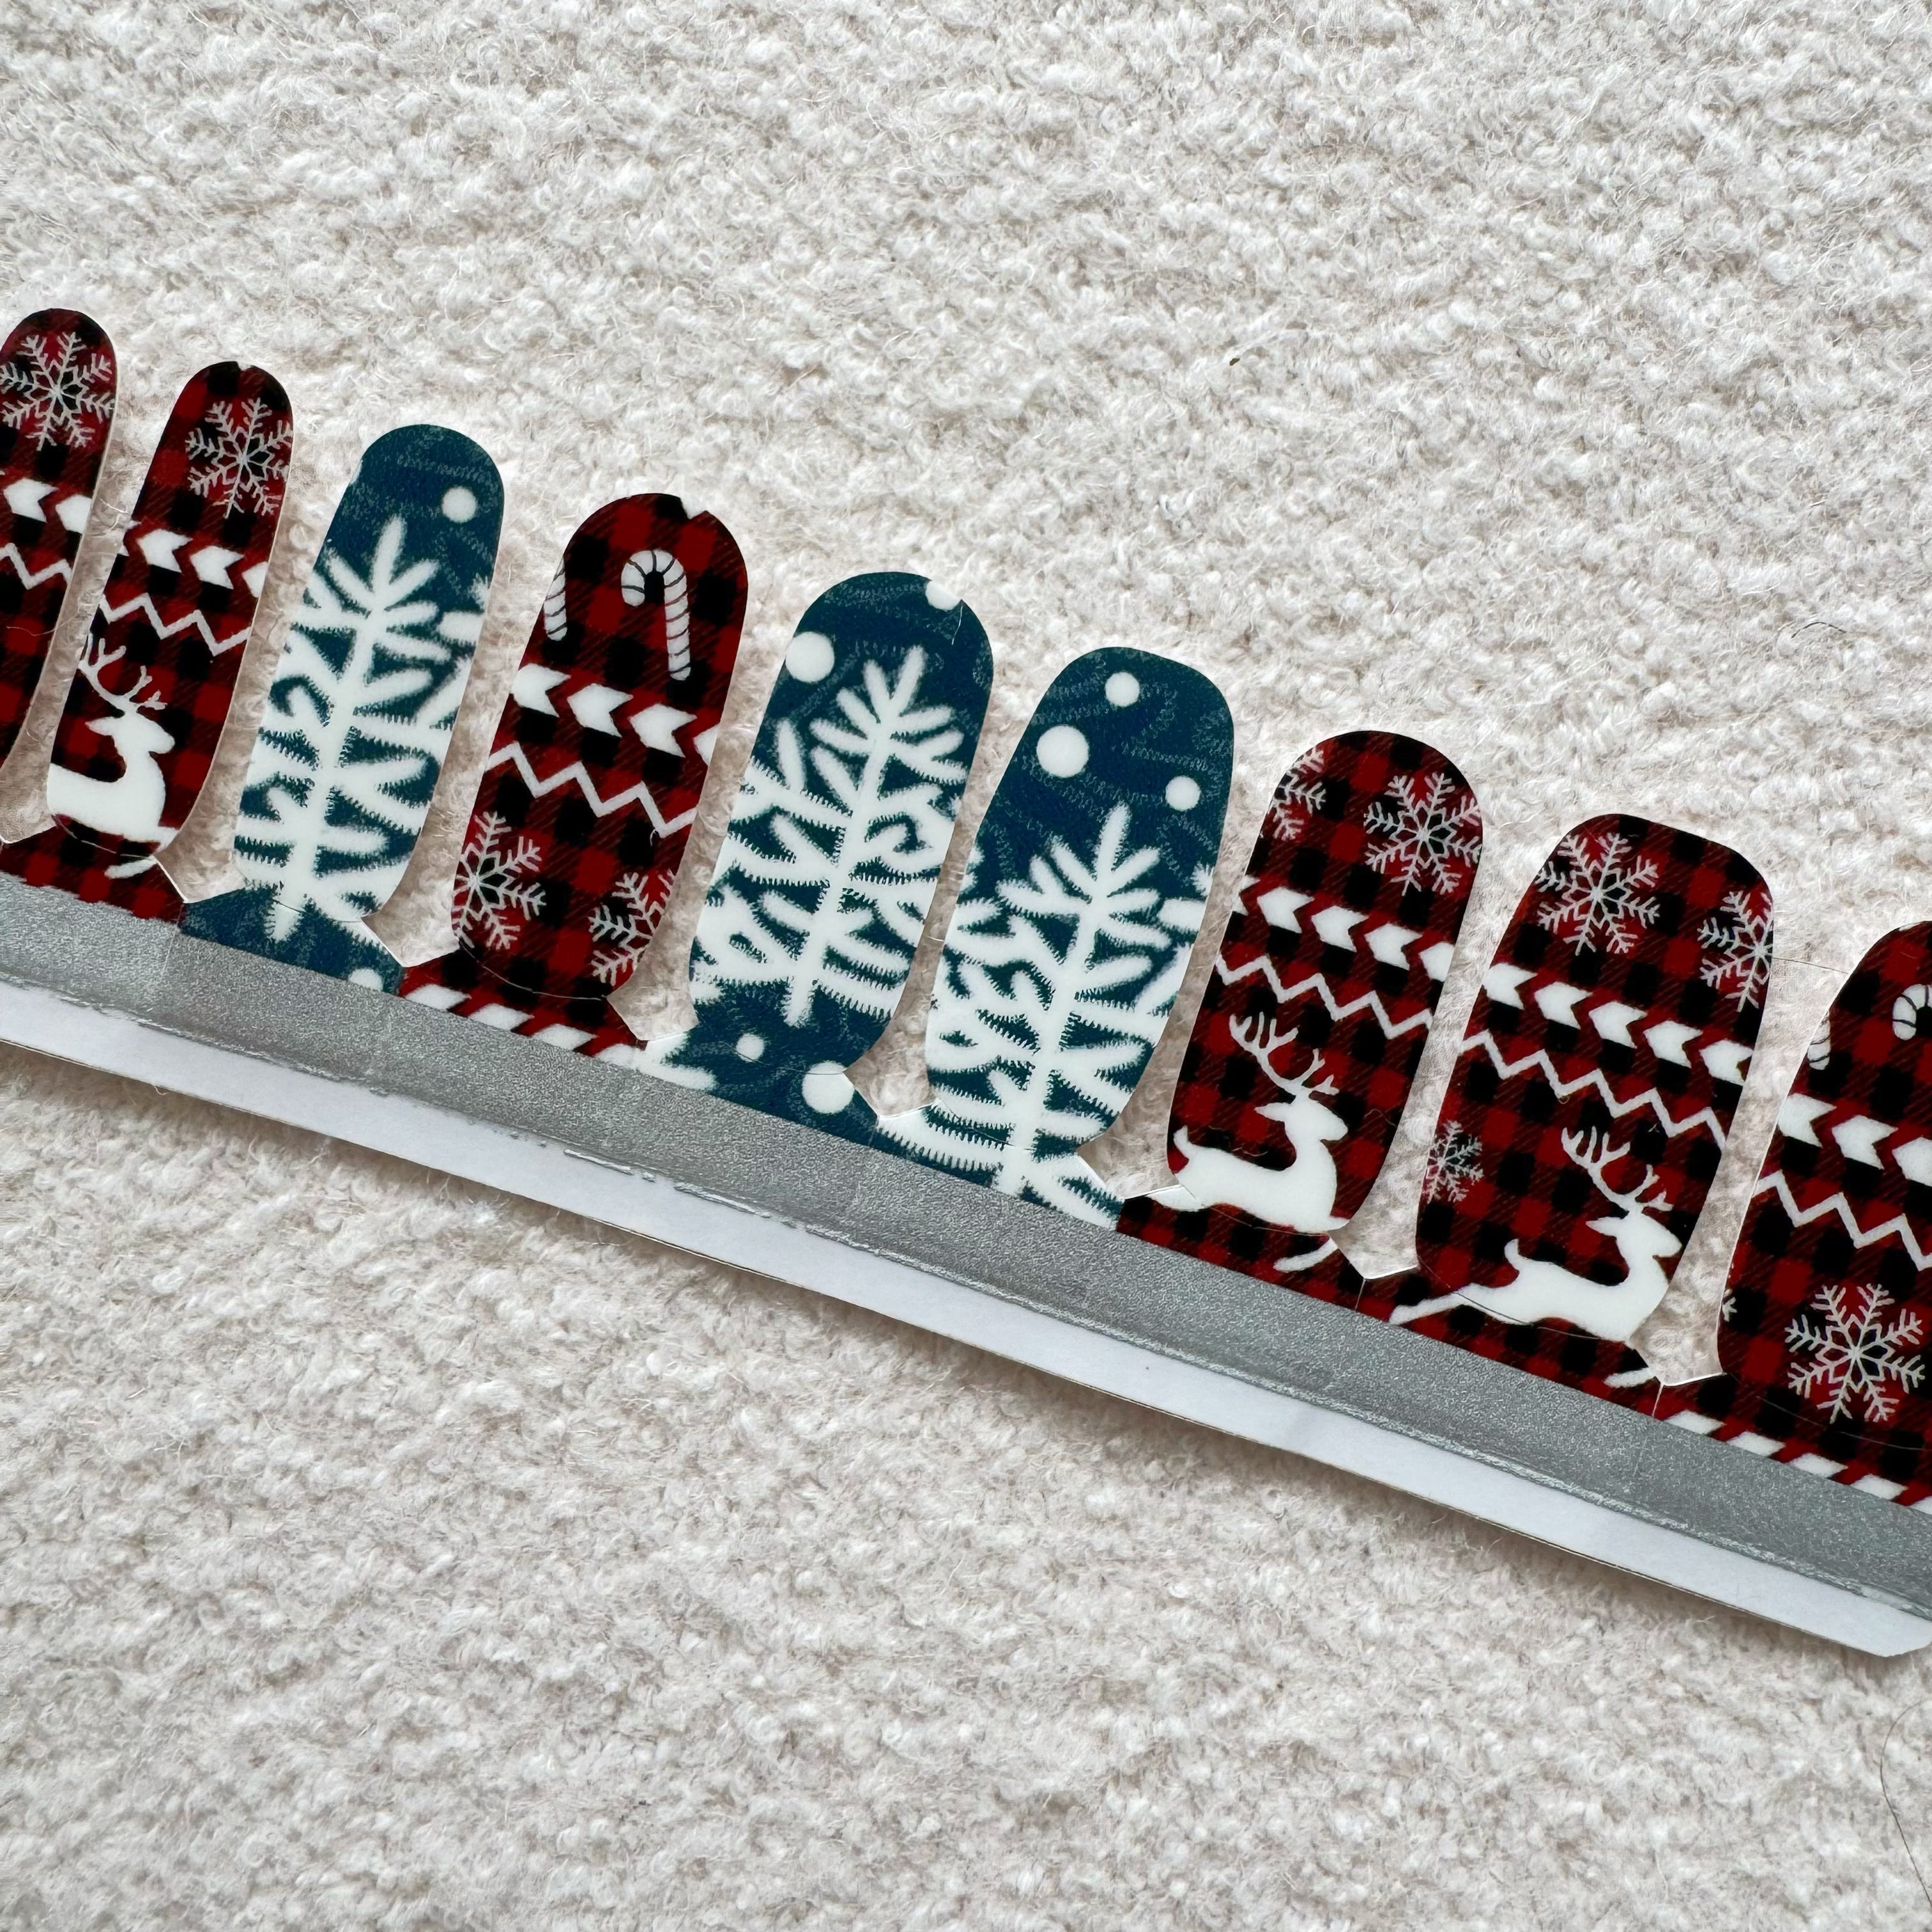 Sleigh Bells-Adult Nail Wraps-Outlined